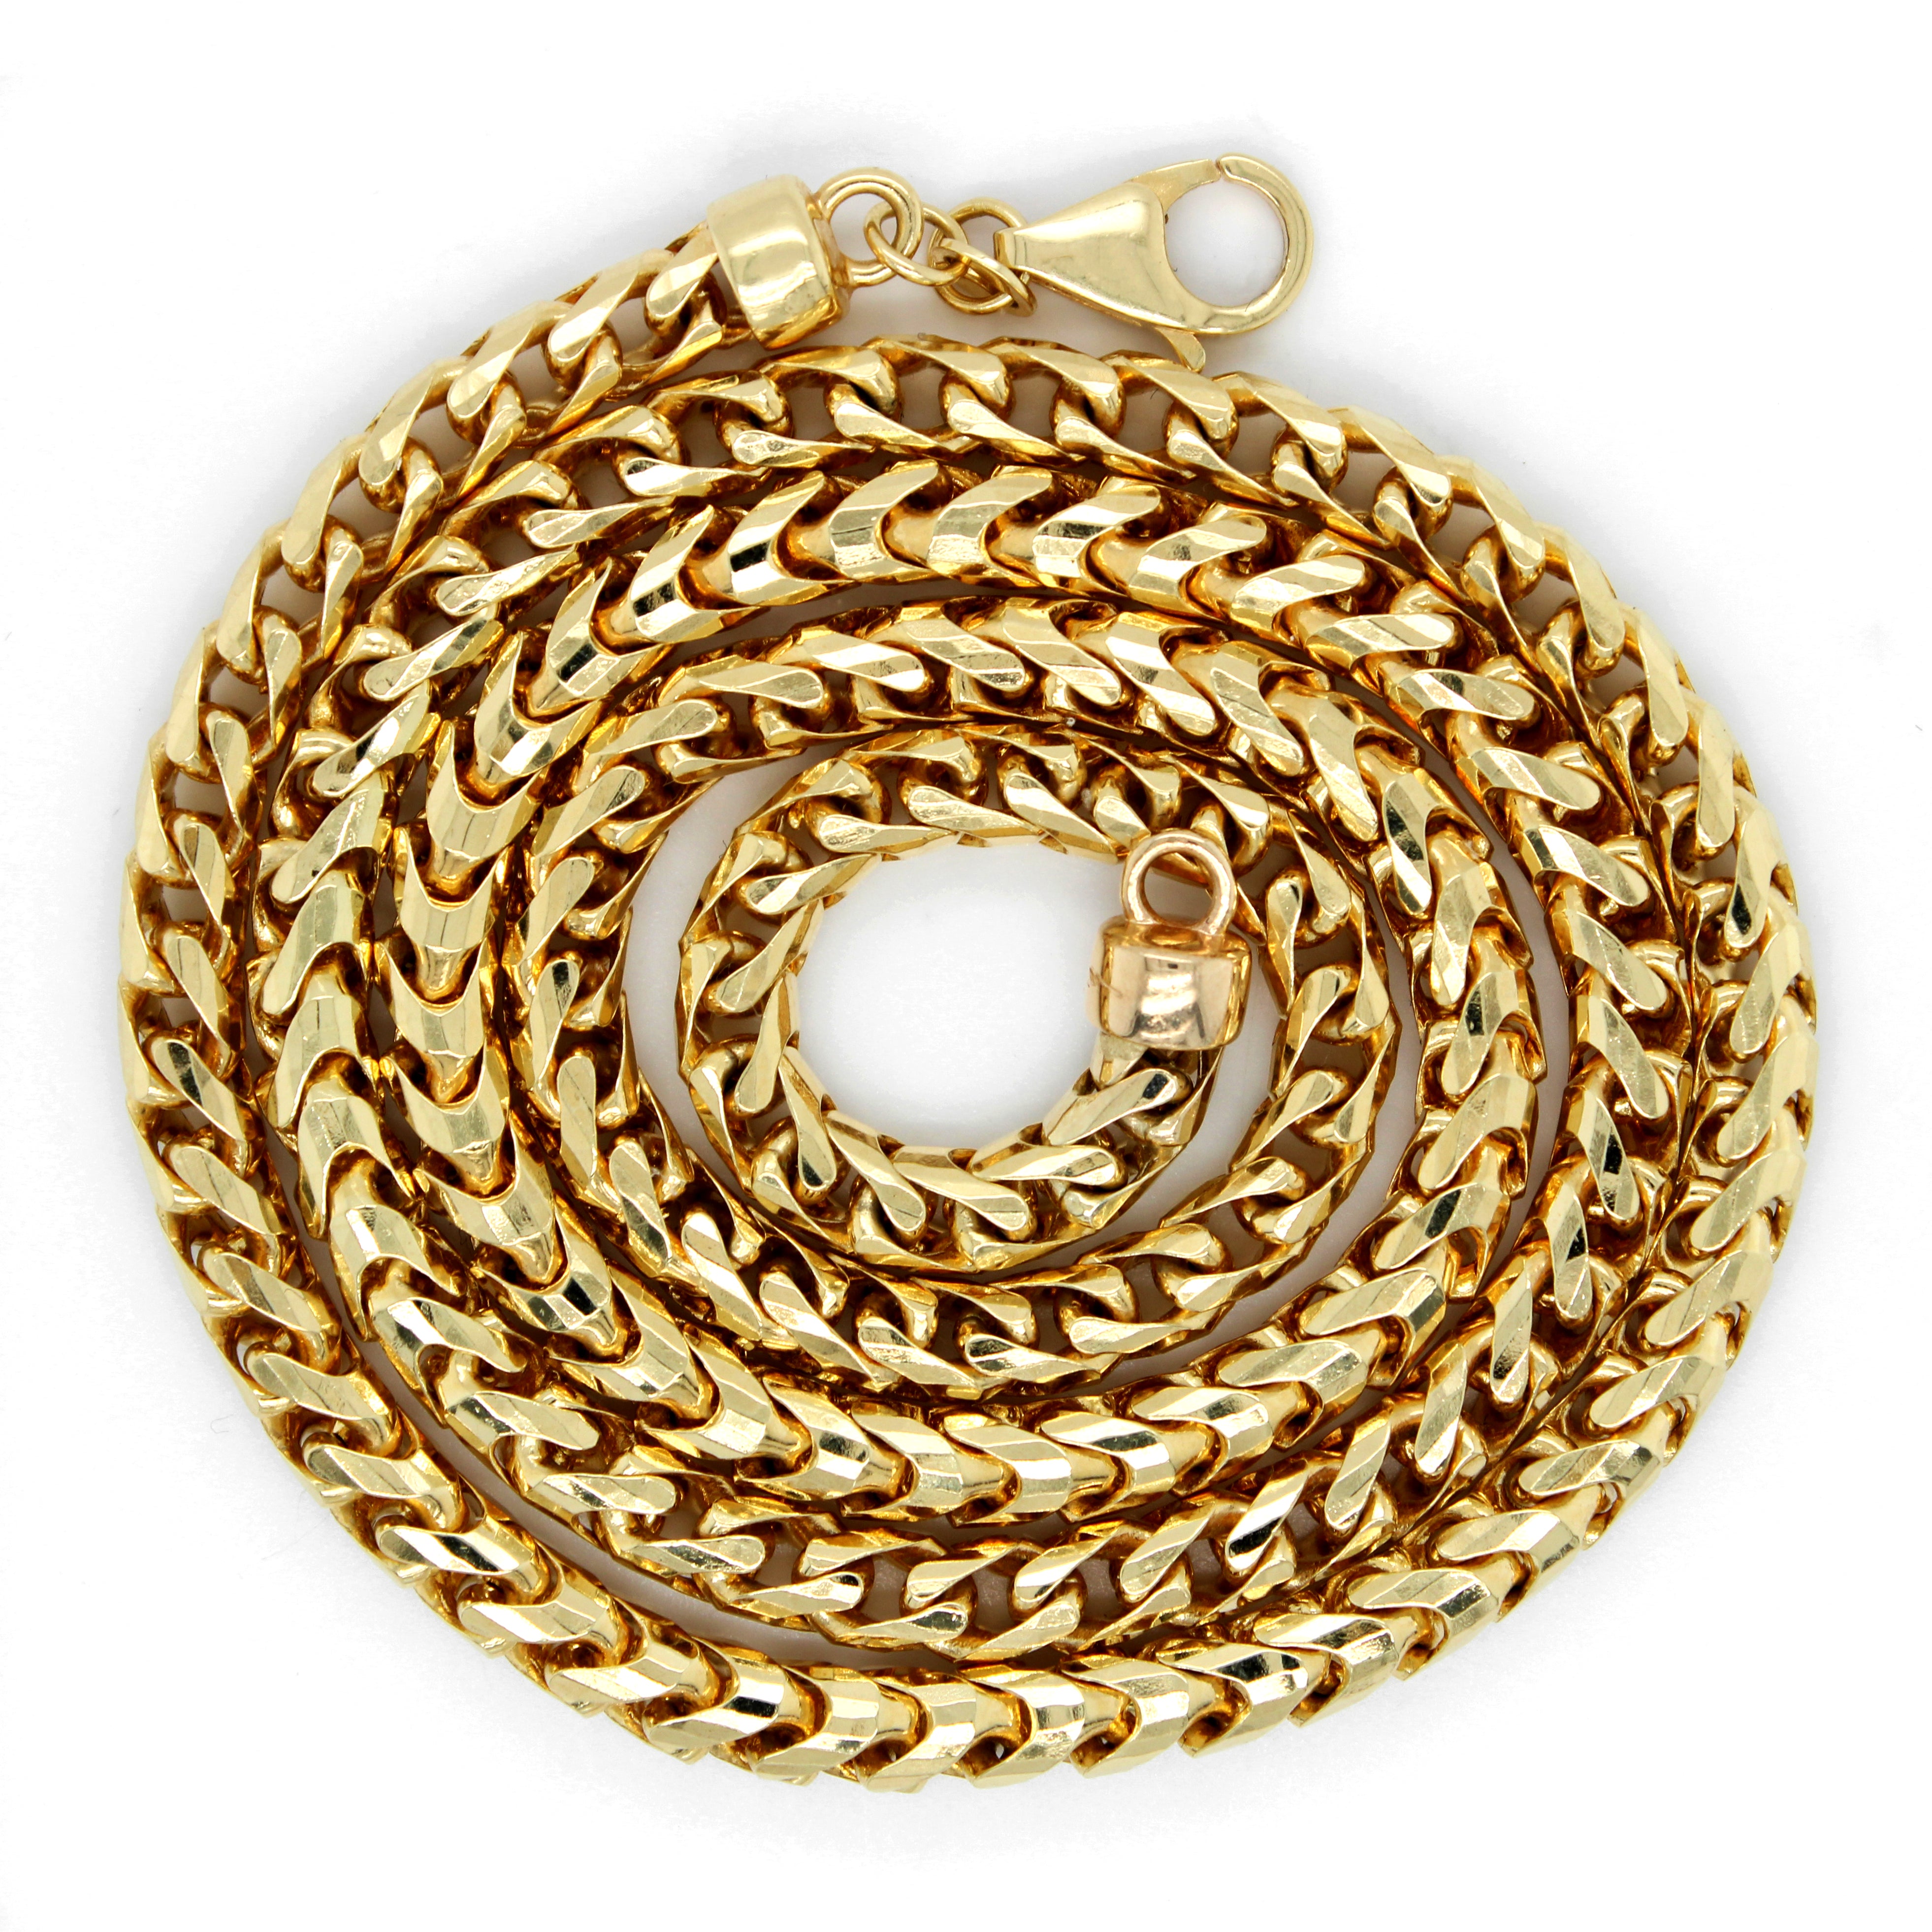 Modern Men's Solid 14k Yellow Gold 4.35mm Franco Link Chain 24" Necklace 65.4 g